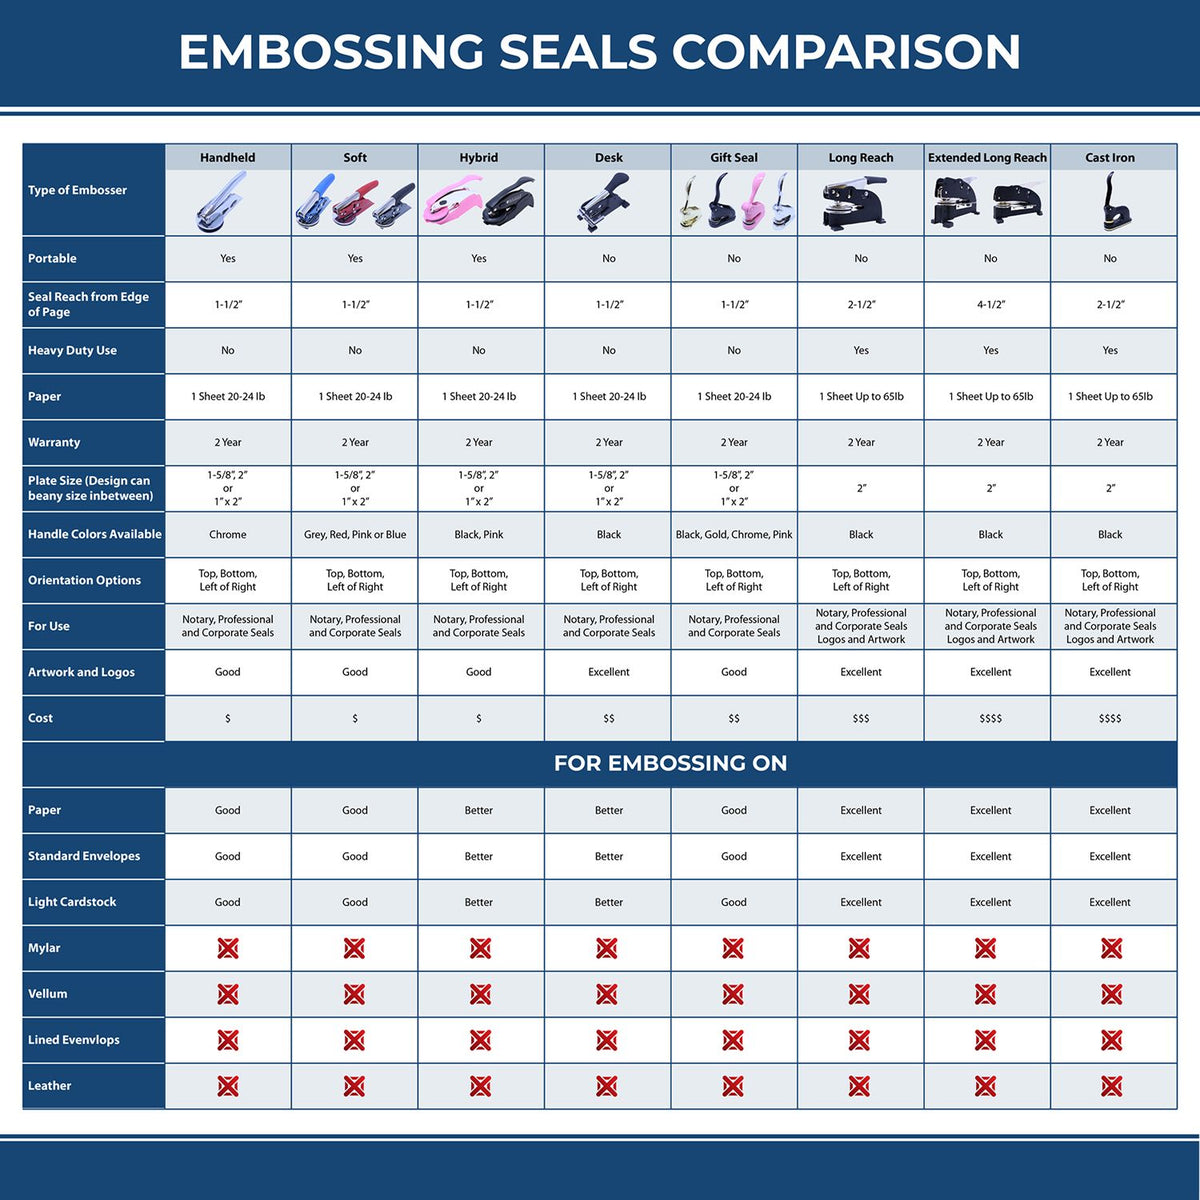 A comparison chart for the different types of mount models available for the Long Reach Wisconsin Geology Seal